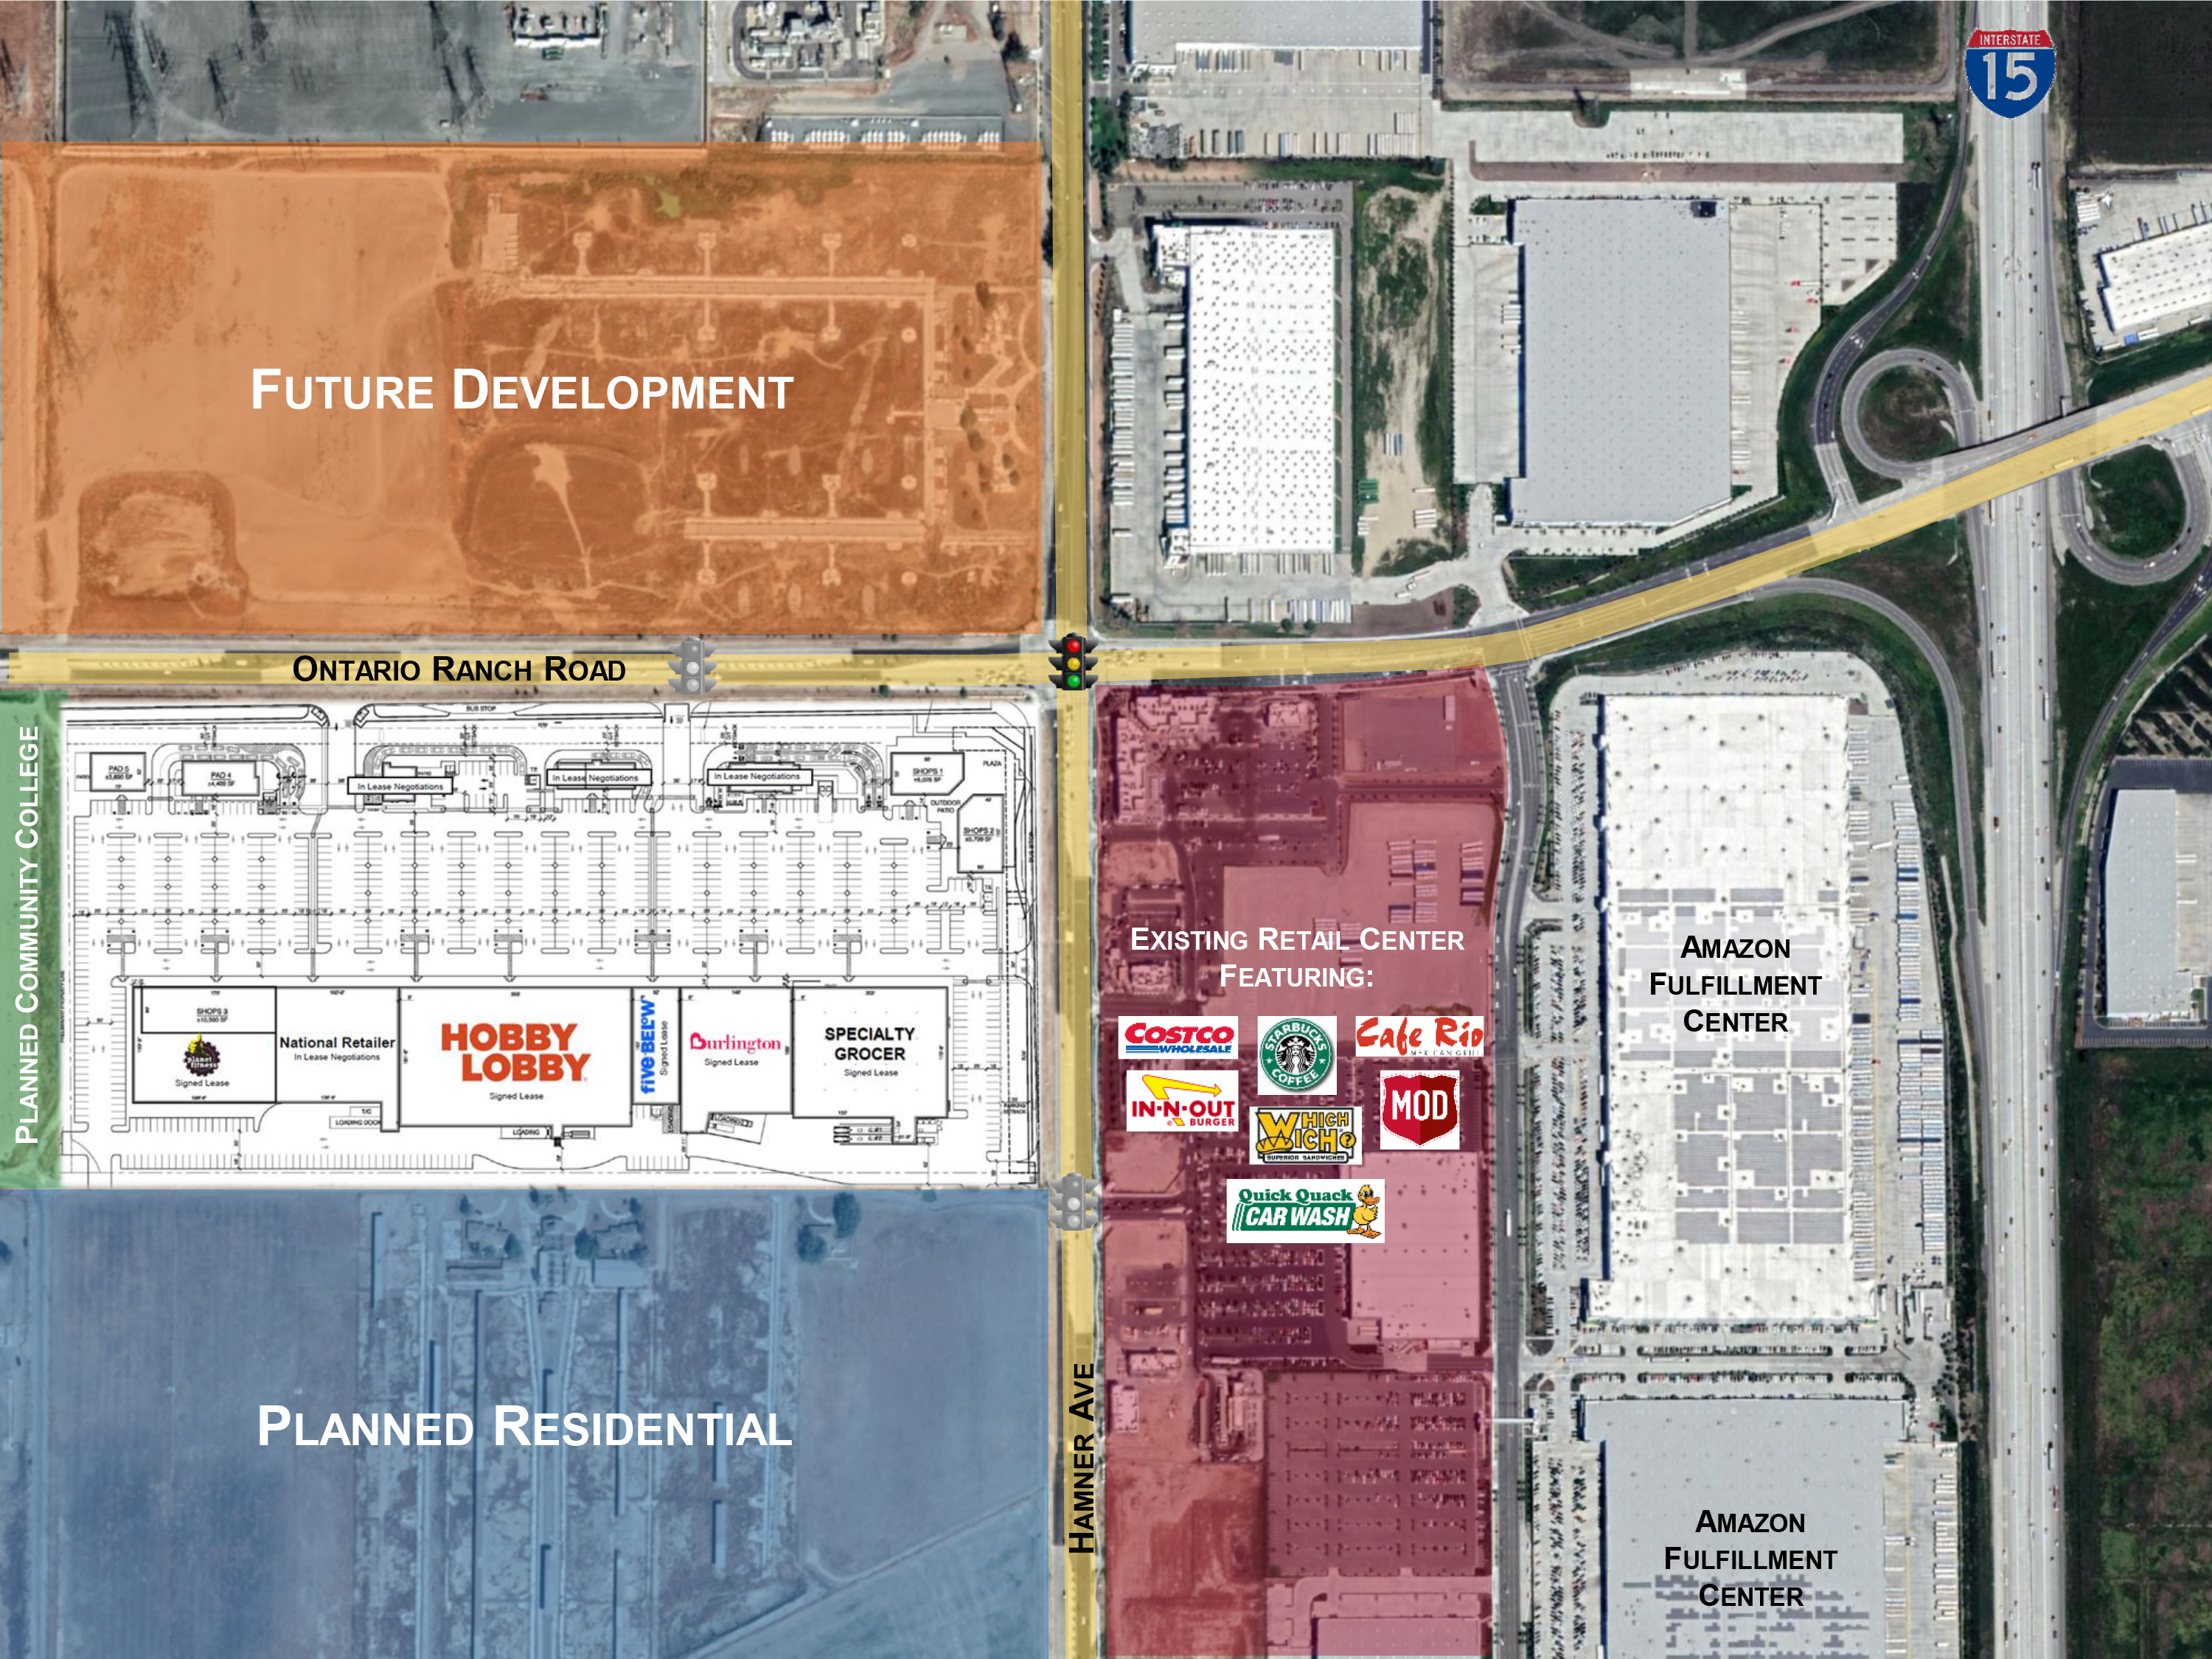 Wood Investments Companies Buys 19.6 Acres to Develop Shopping Center with National Grocer, Burlington, Five Below, Hobby Lobby and Planet Fitness in Ontario, Calif.